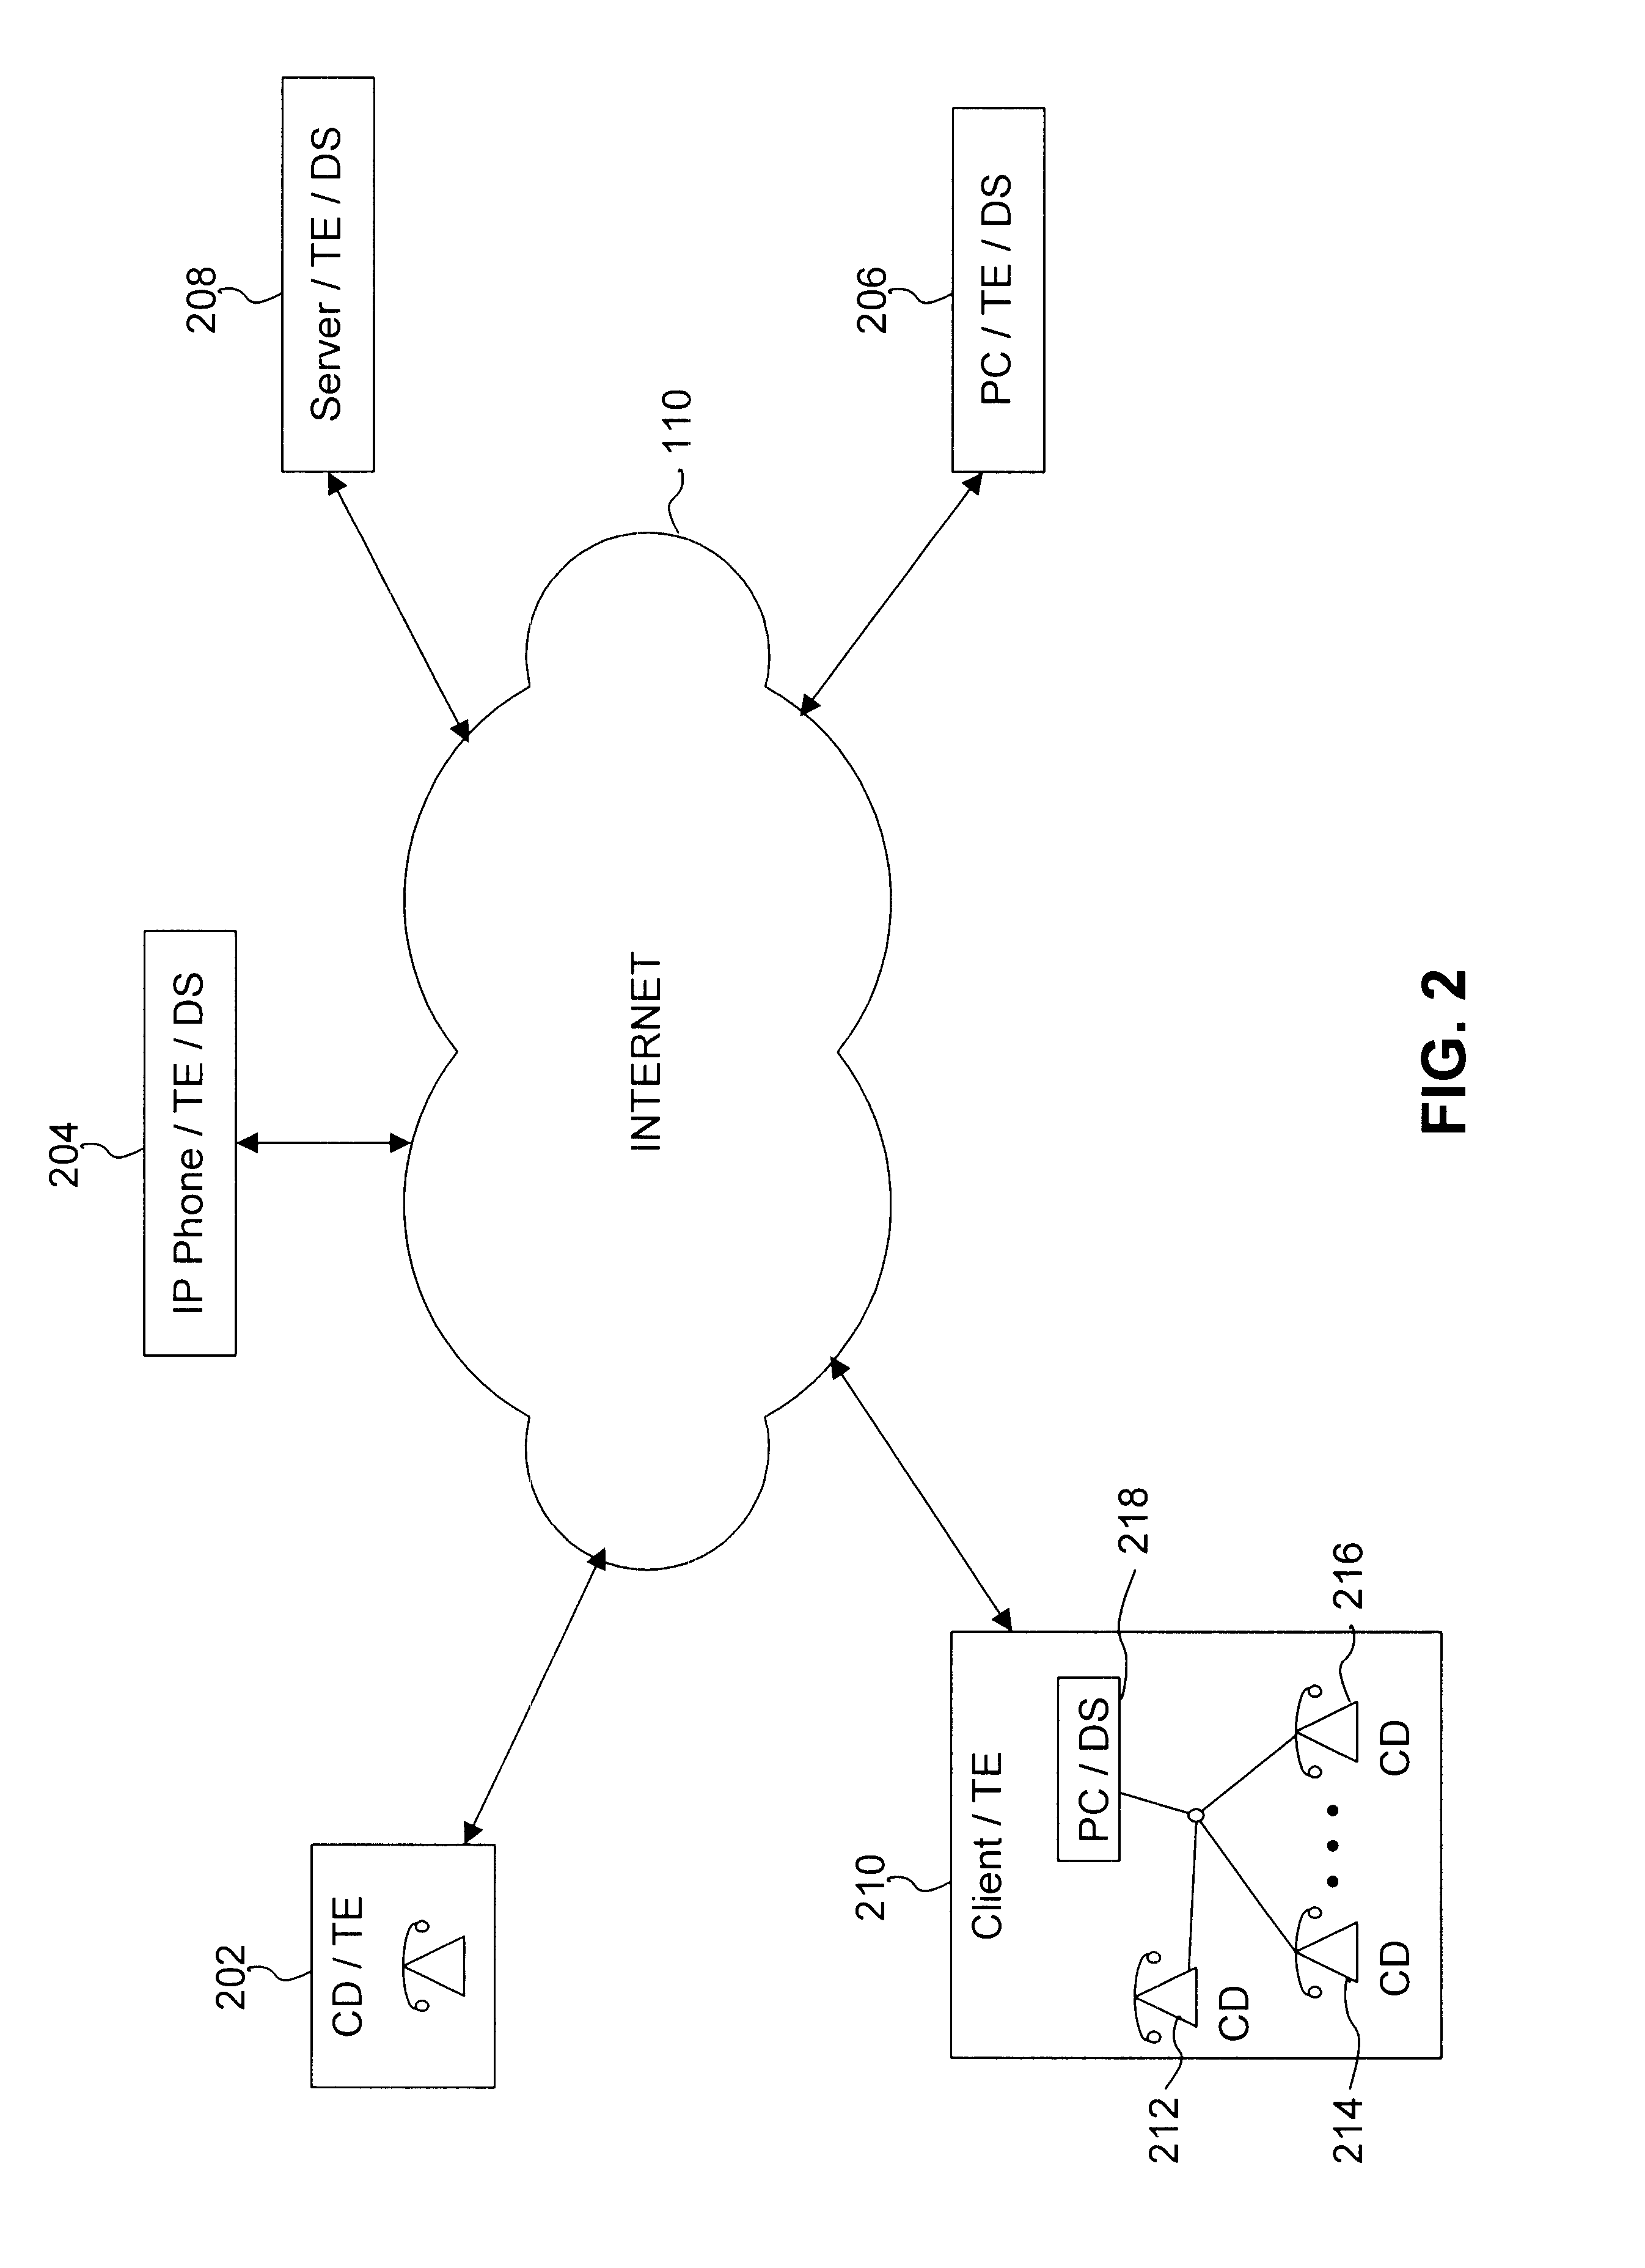 System, method and computer program product for diagnostic supervision of internet connections